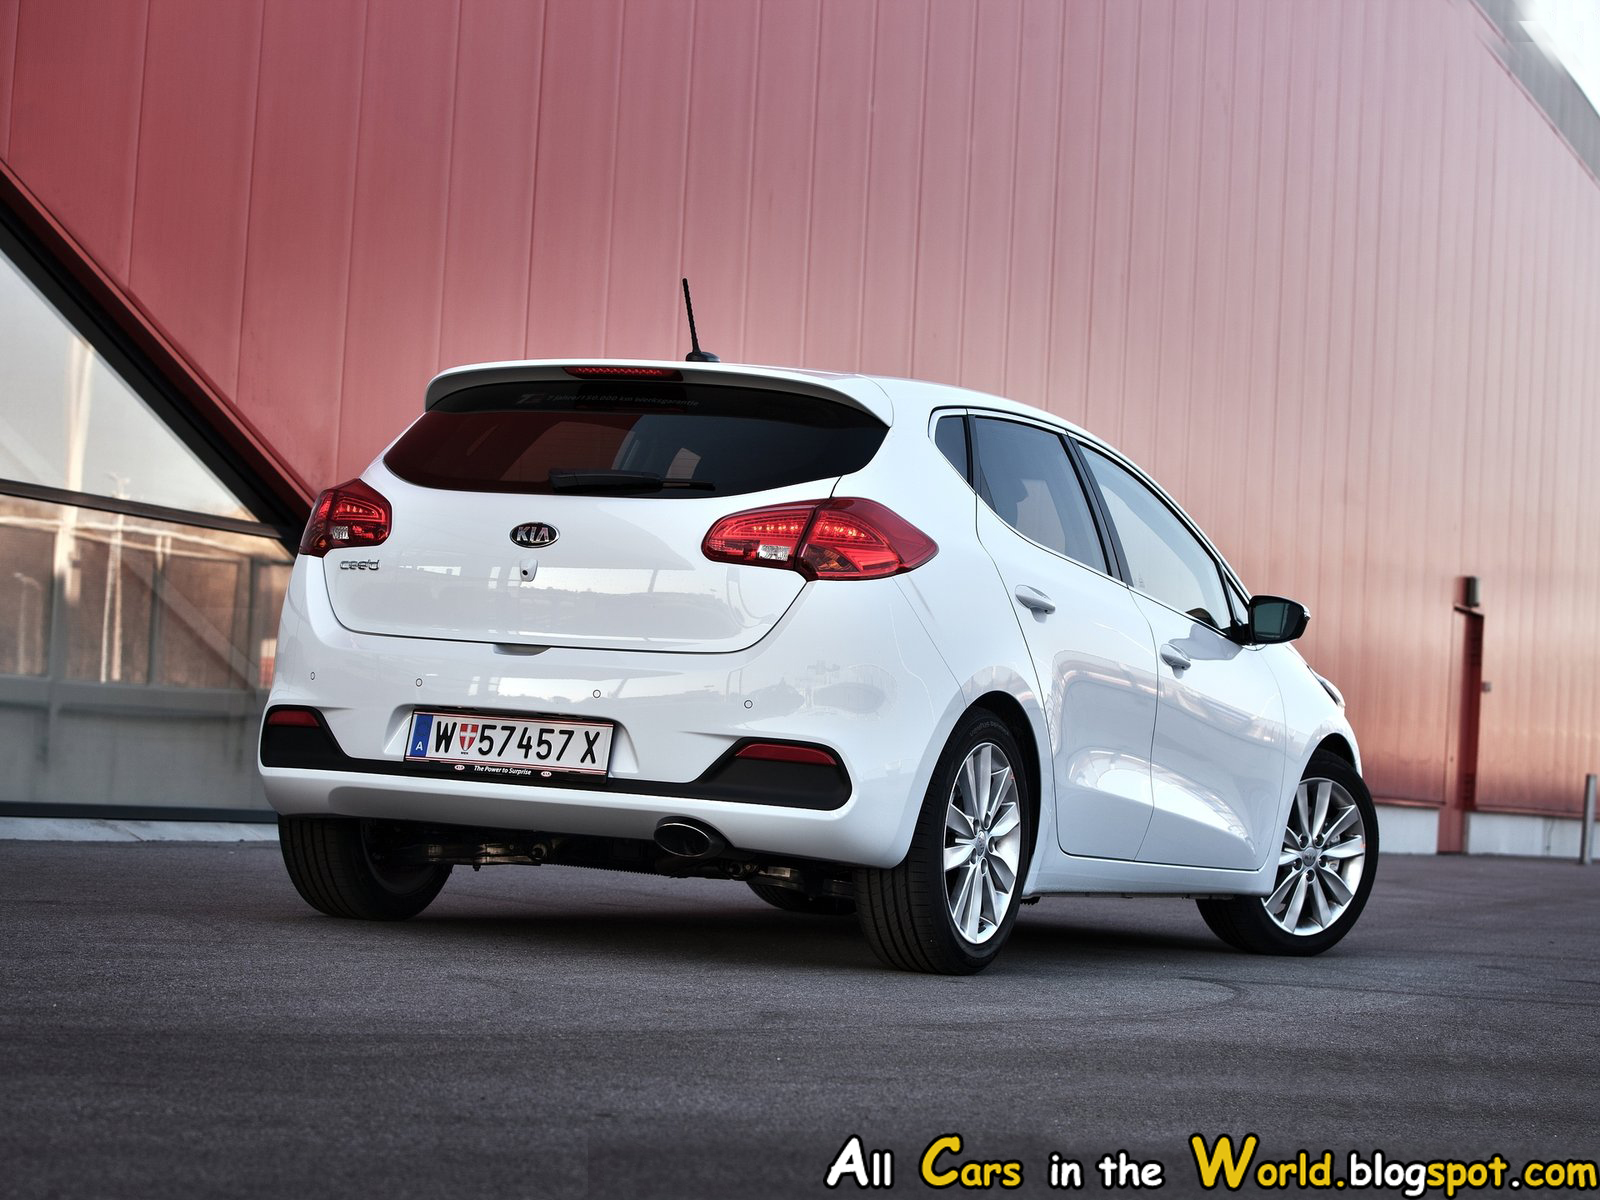 The 2013 Kia Ceed ~ All Cars in the World